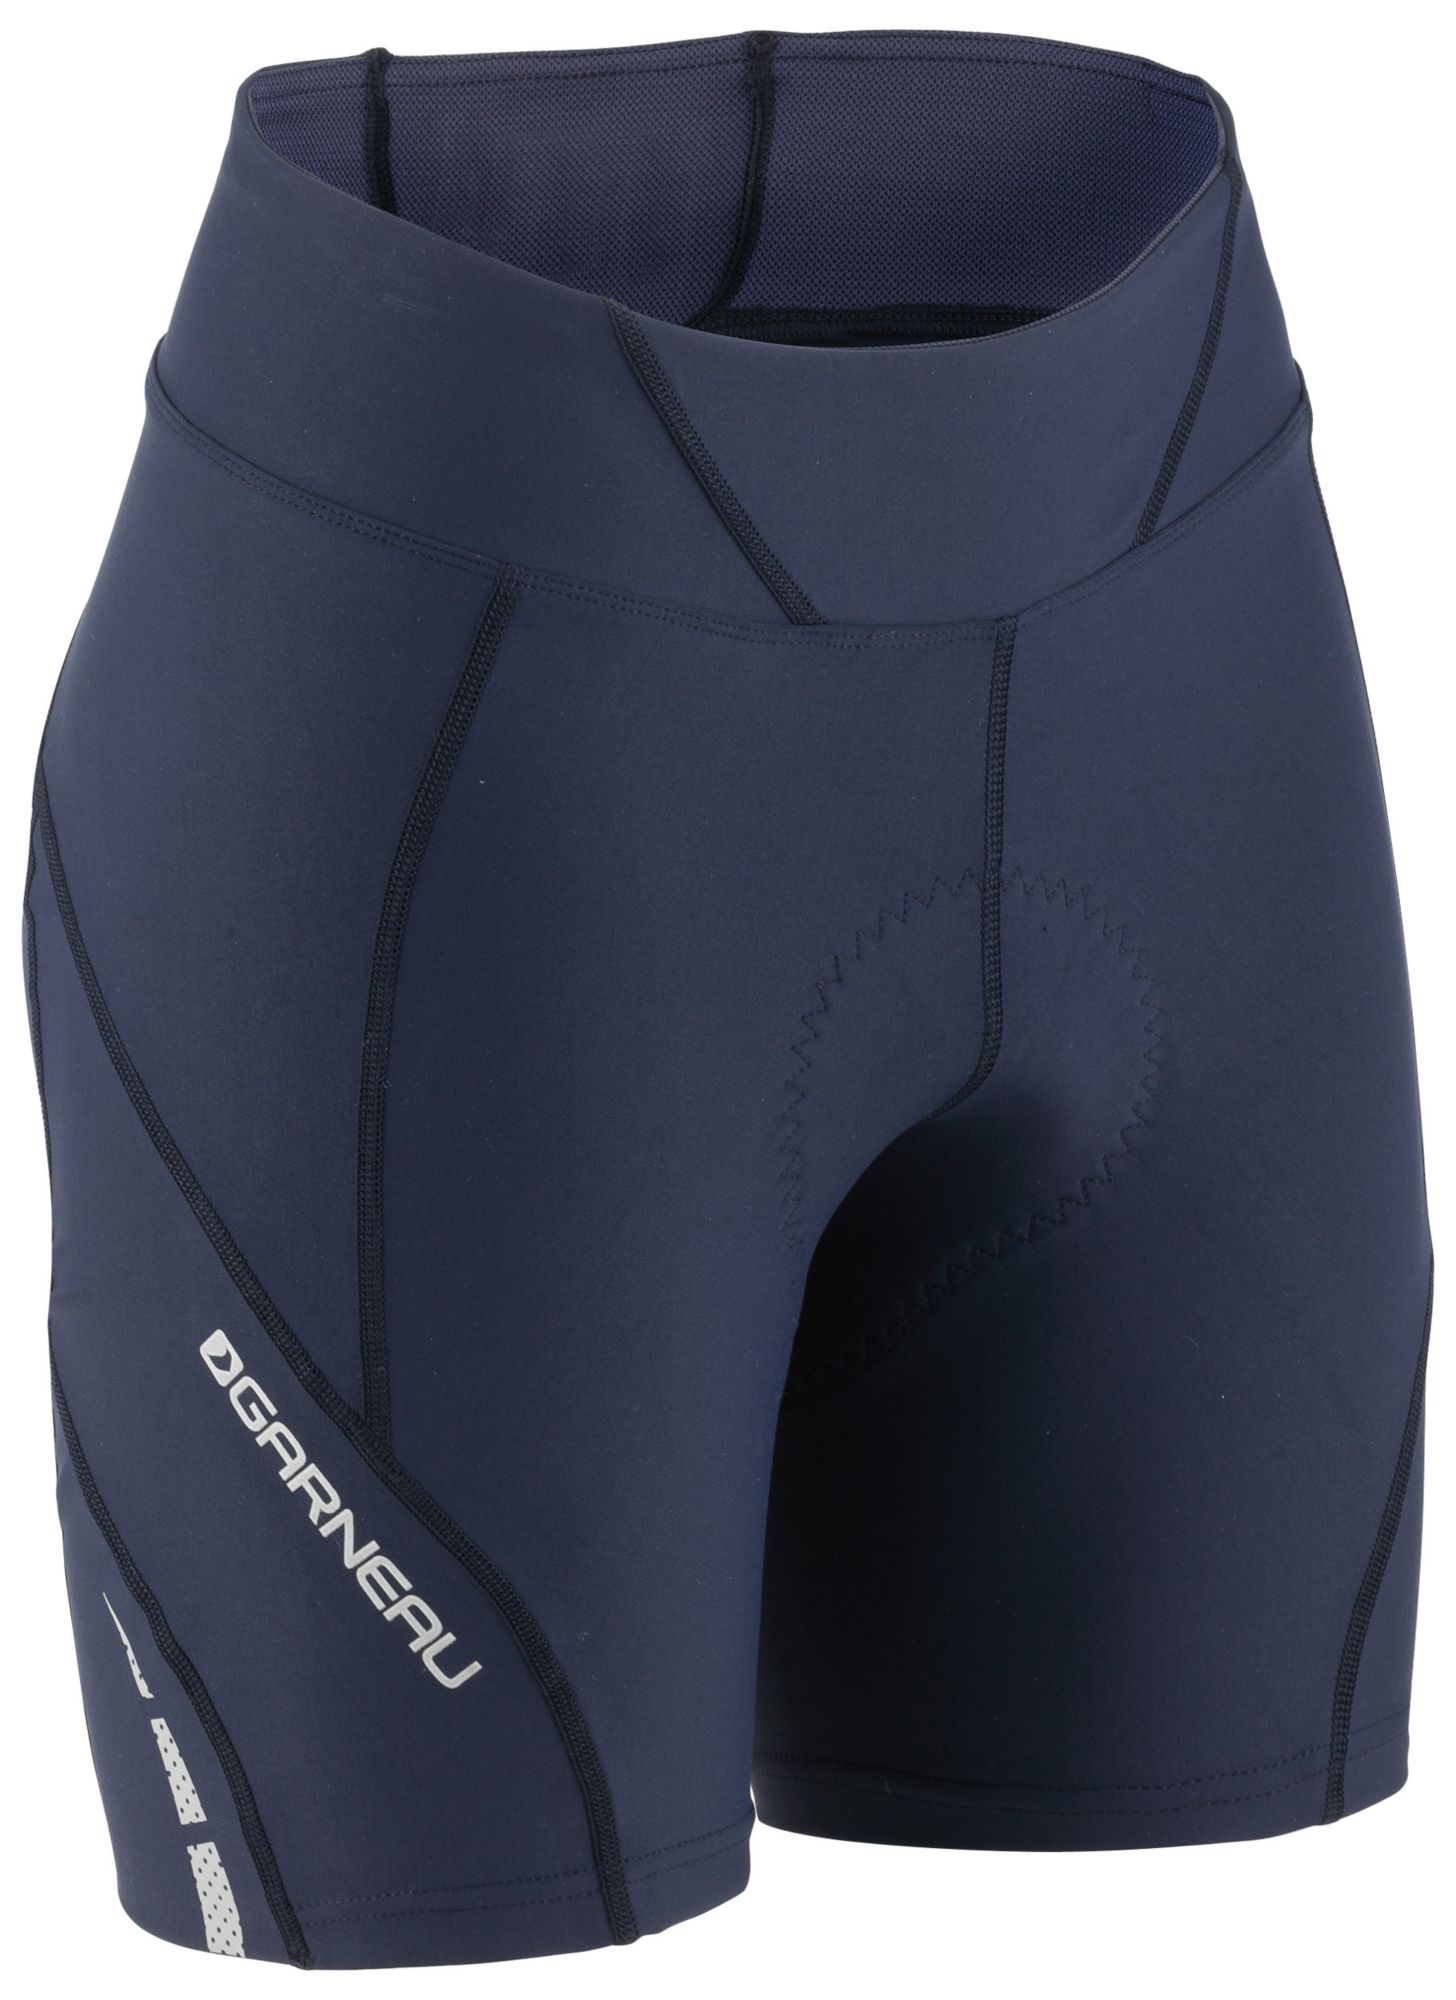 Bike Shorts for Cycling | Best Price Guarantee at DICK&#39;S